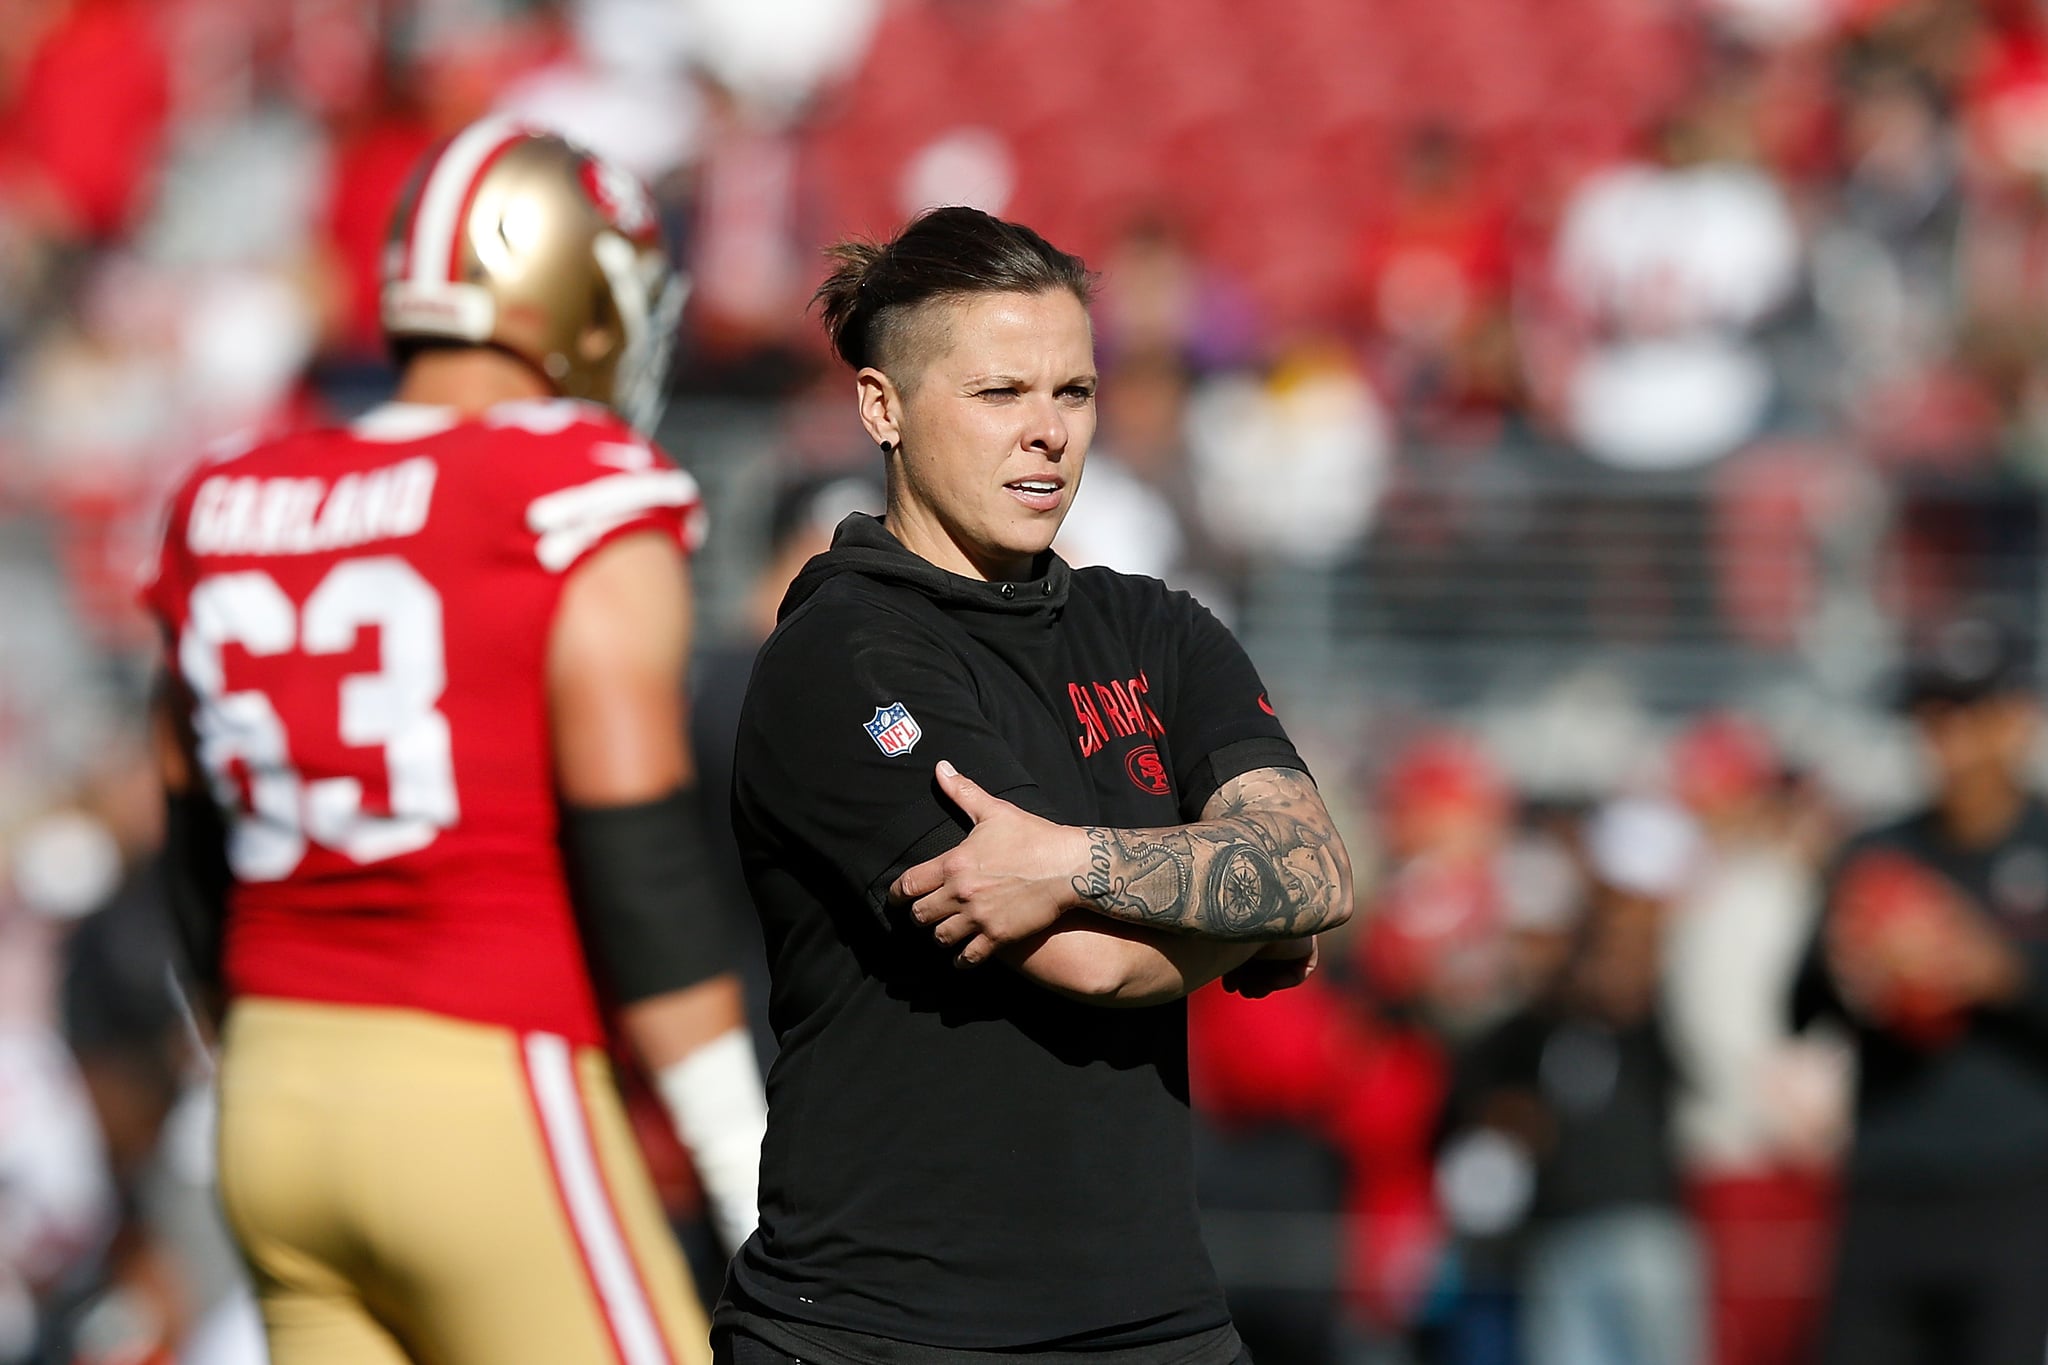 SANTA CLARA, CALIFORNIA - DECEMBER 15: San Francisco 49ers offensive assistant coach Katie Sowers looks on during the warm up before the game against the Atlanta Falcons at Levi's Stadium on December 15, 2019 in Santa Clara, California. (Photo by Lachlan Cunningham/Getty Images)